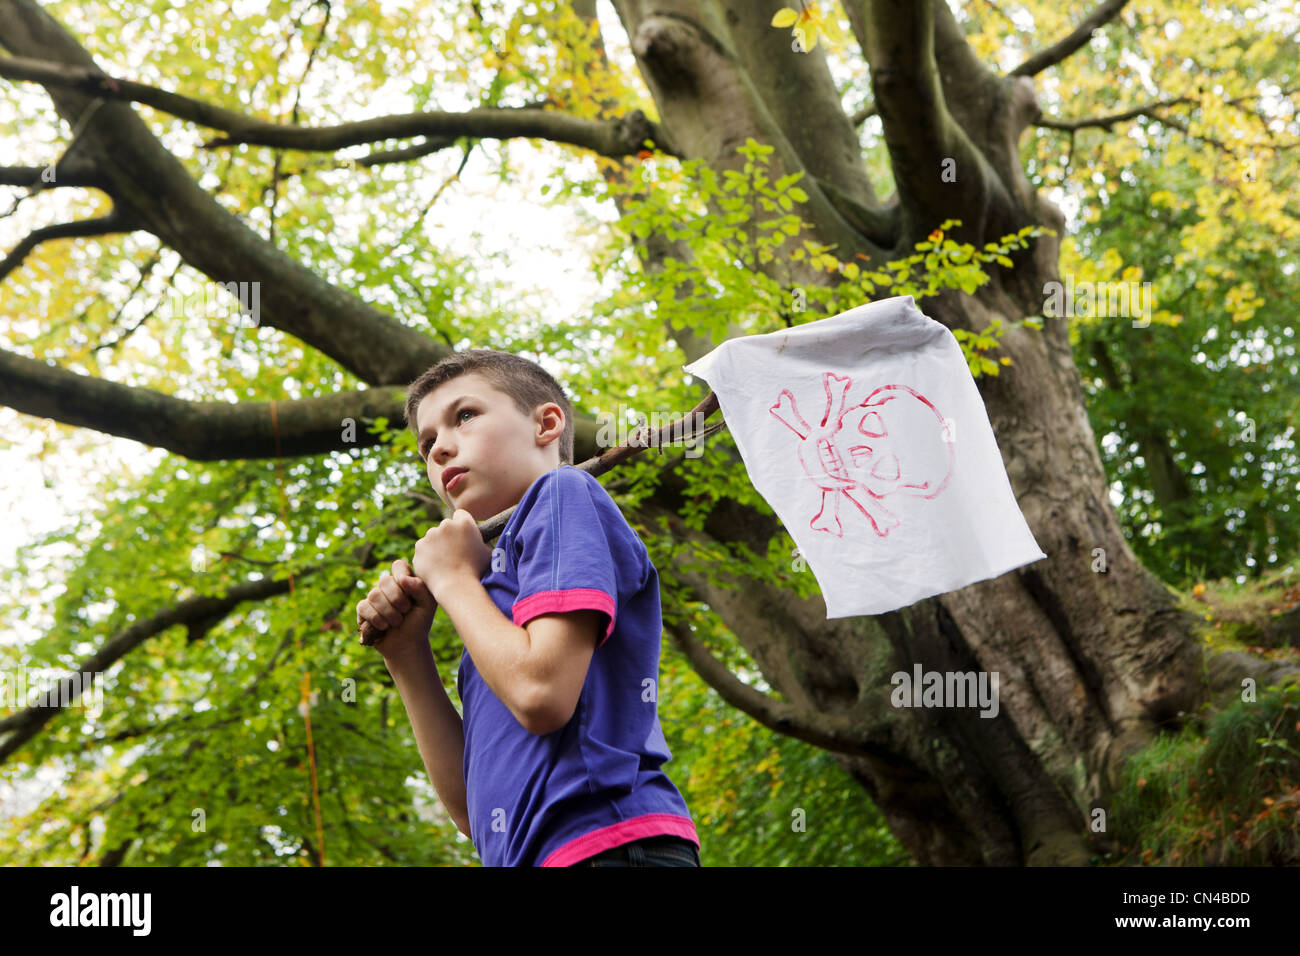 Boy holding a pirate flag Stock Photo